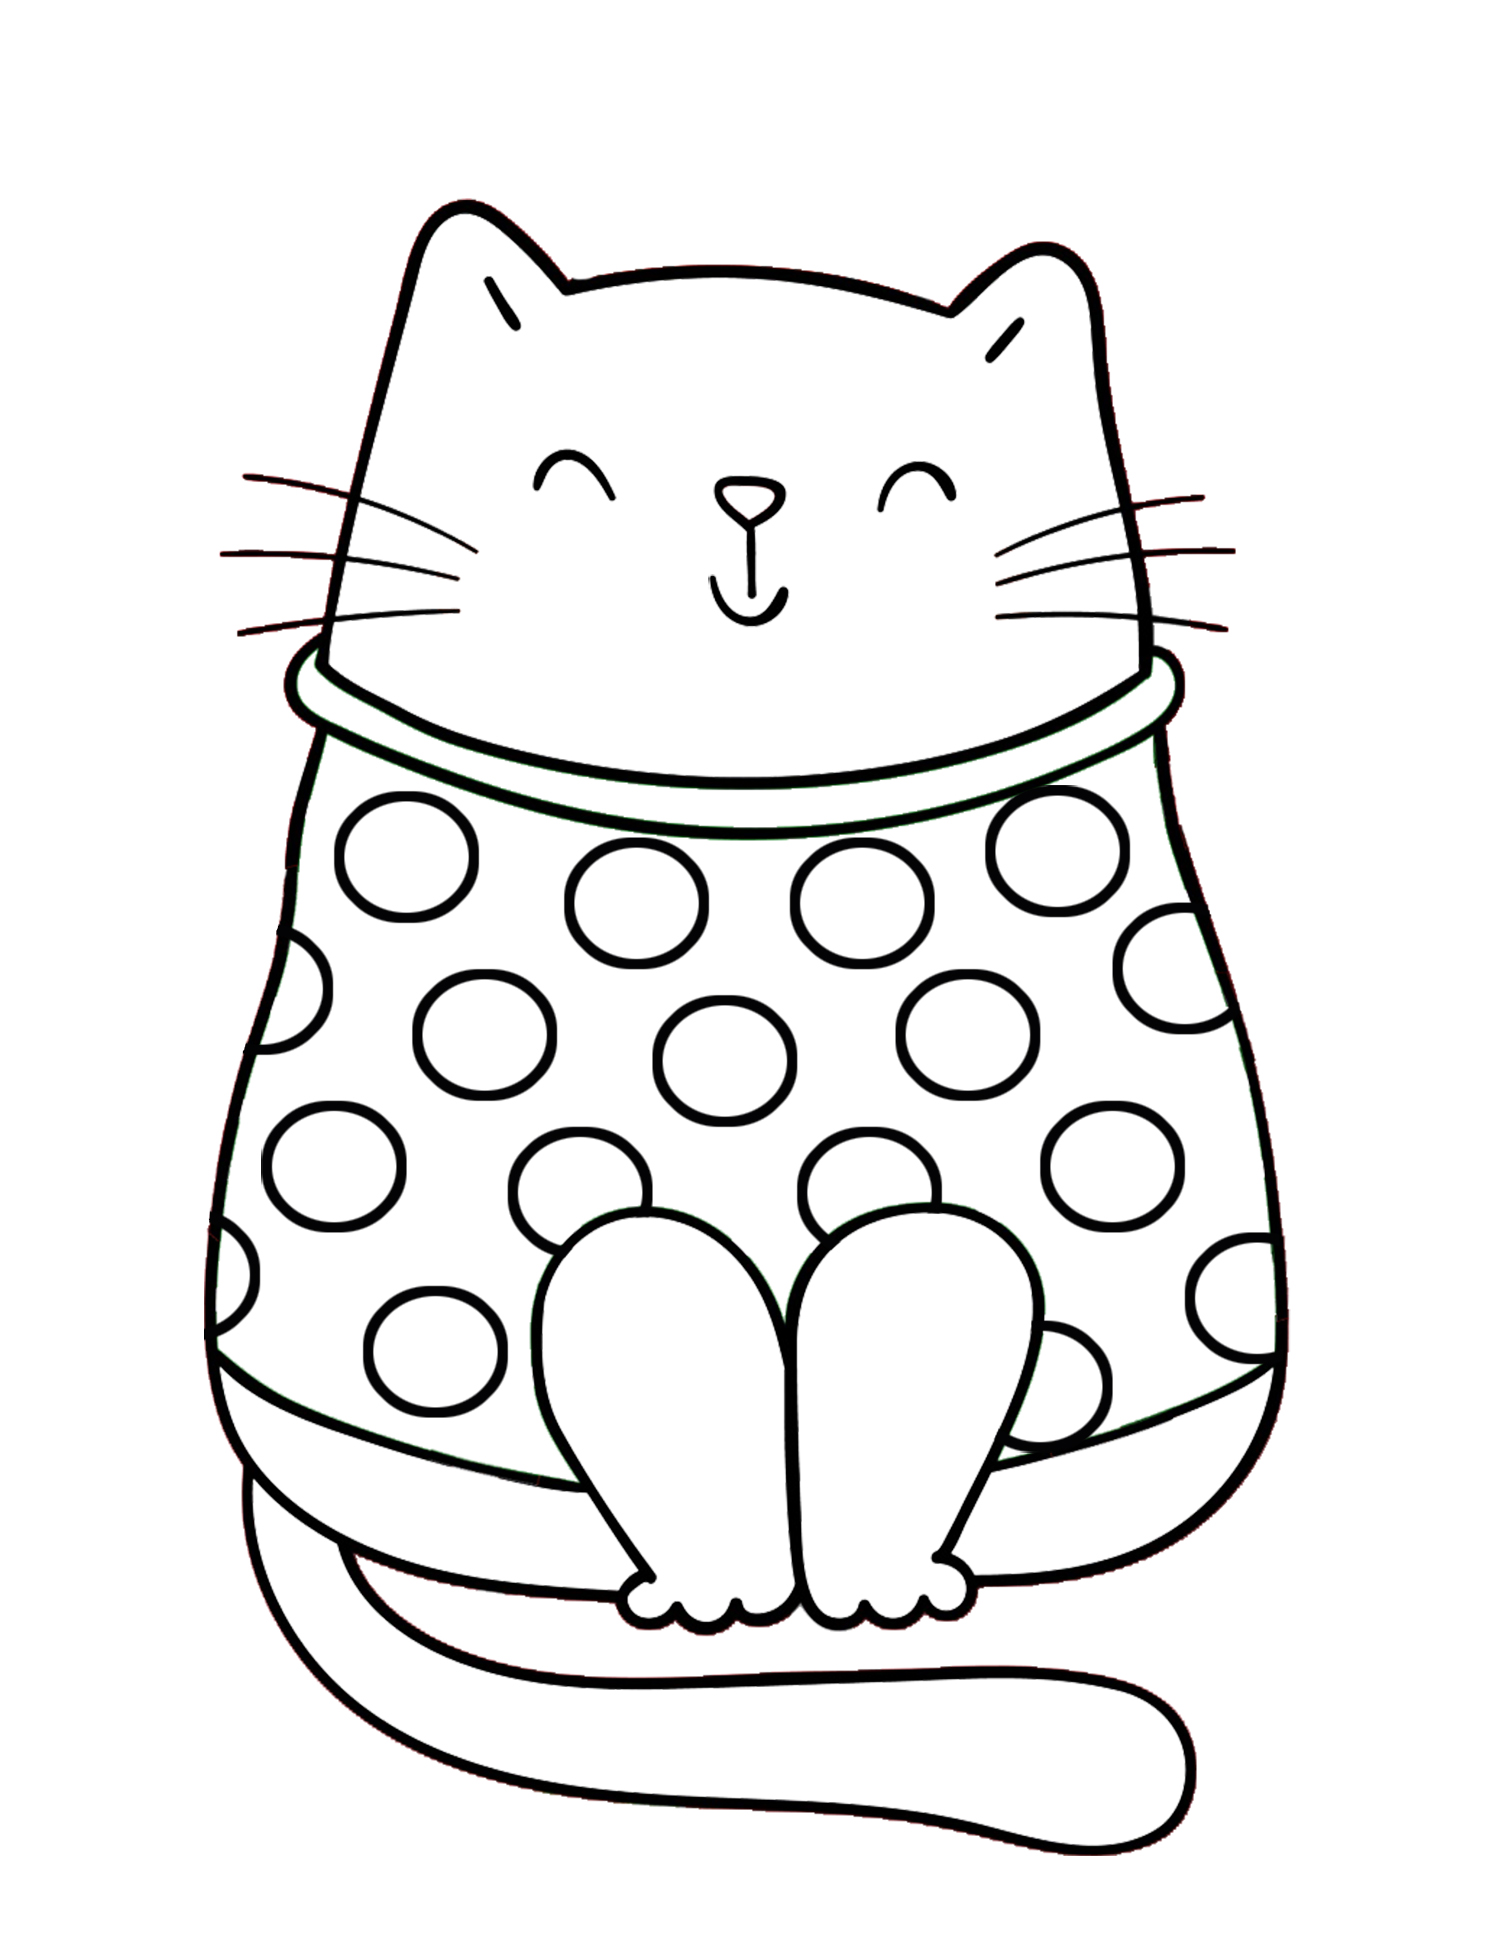 cat colouring pages